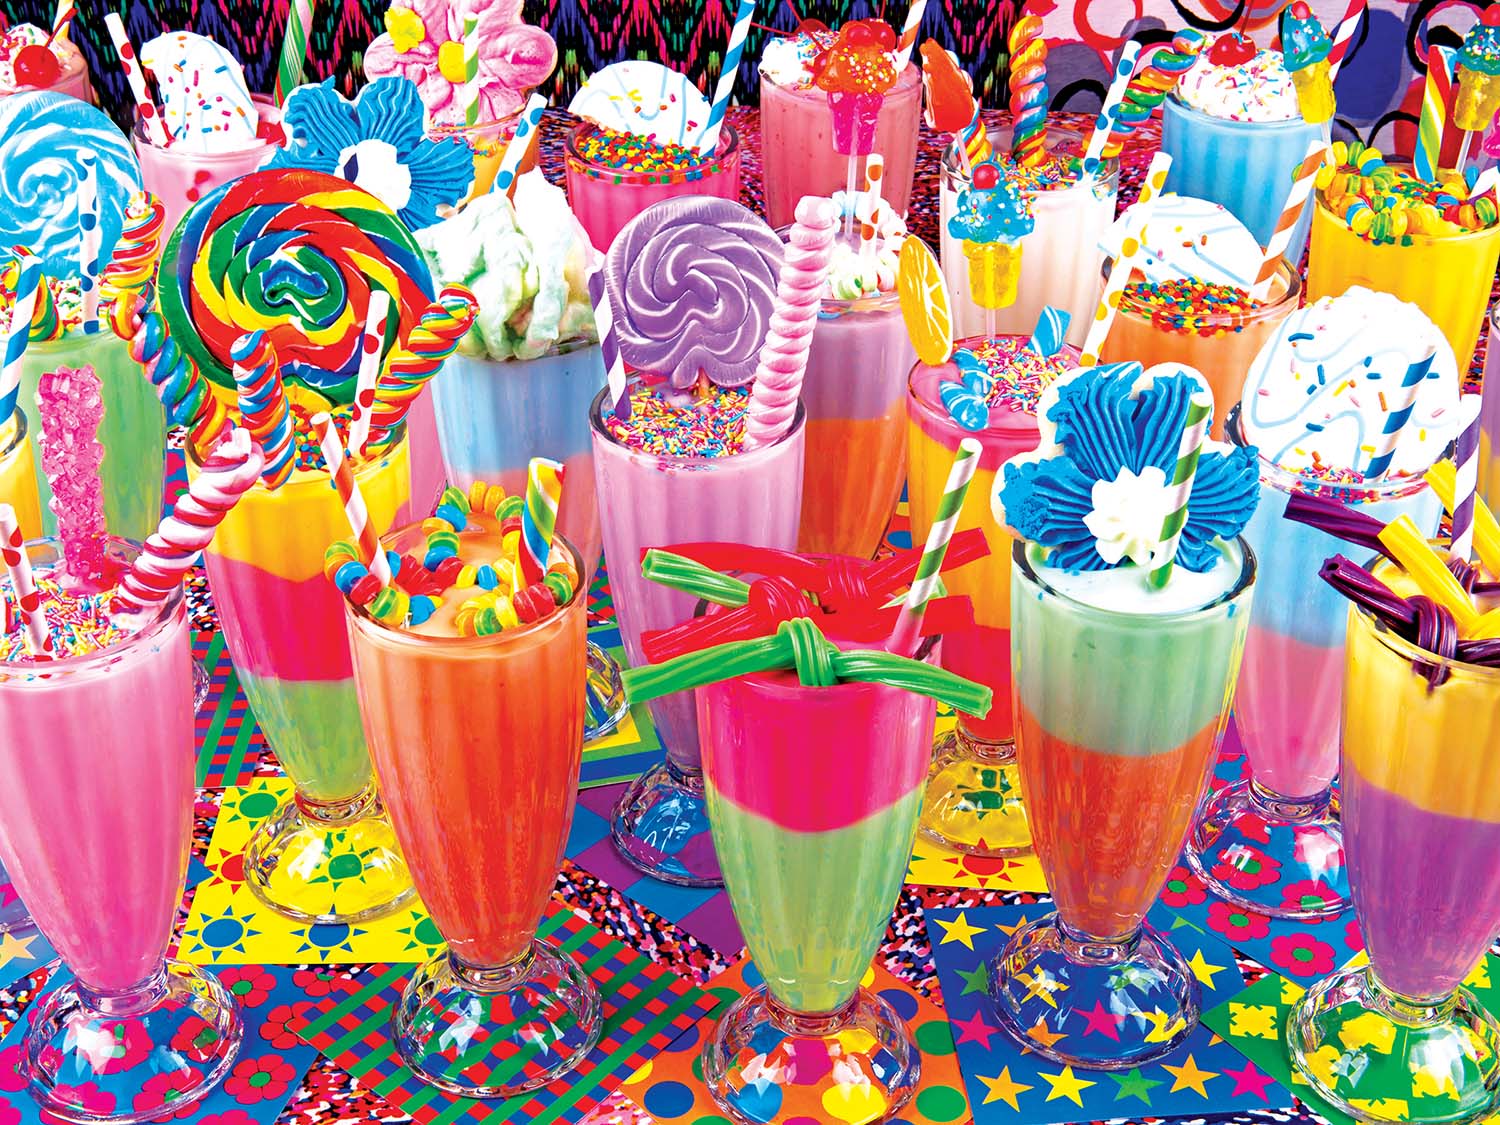 Puzzle Collector - Sugary Shakes Dessert & Sweets Jigsaw Puzzle